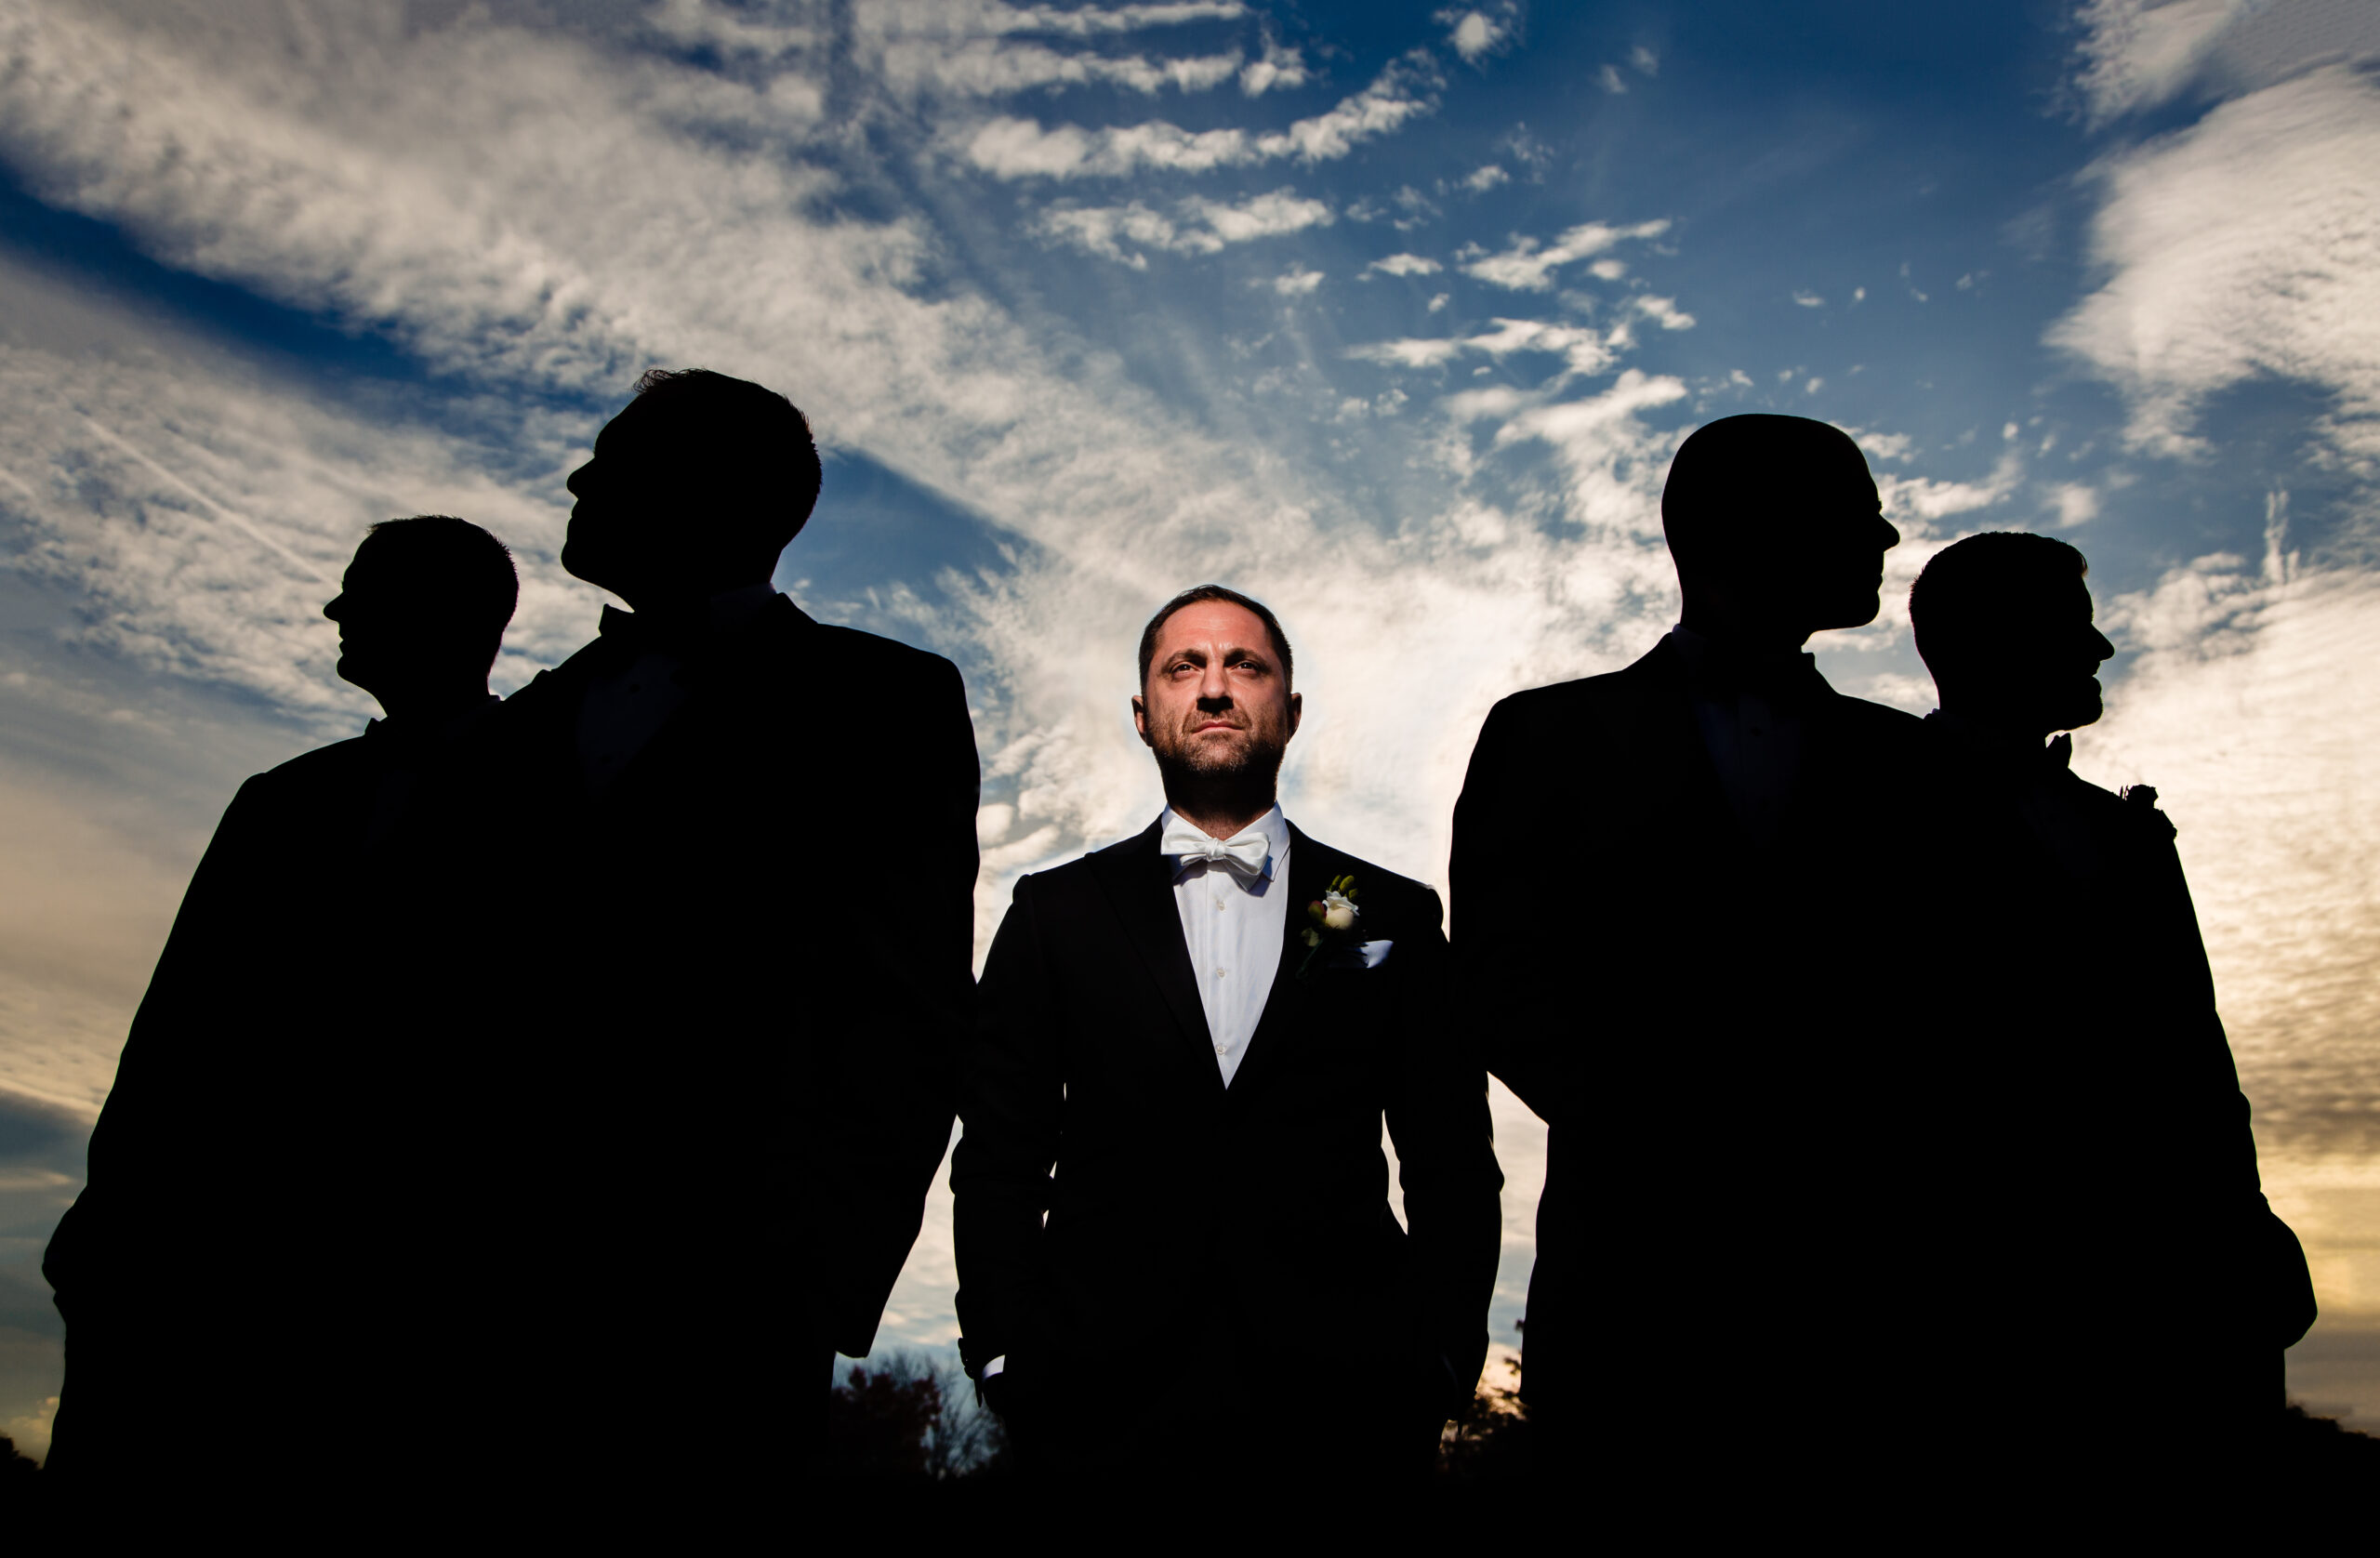 A creative portrait featuring the groom well-lit in the foreground, while his groomsmen are depicted in silhouette in the background. This artistic composition, skillfully captured by Jarot Bocanegra Photography, adds a unique touch to the wedding photography